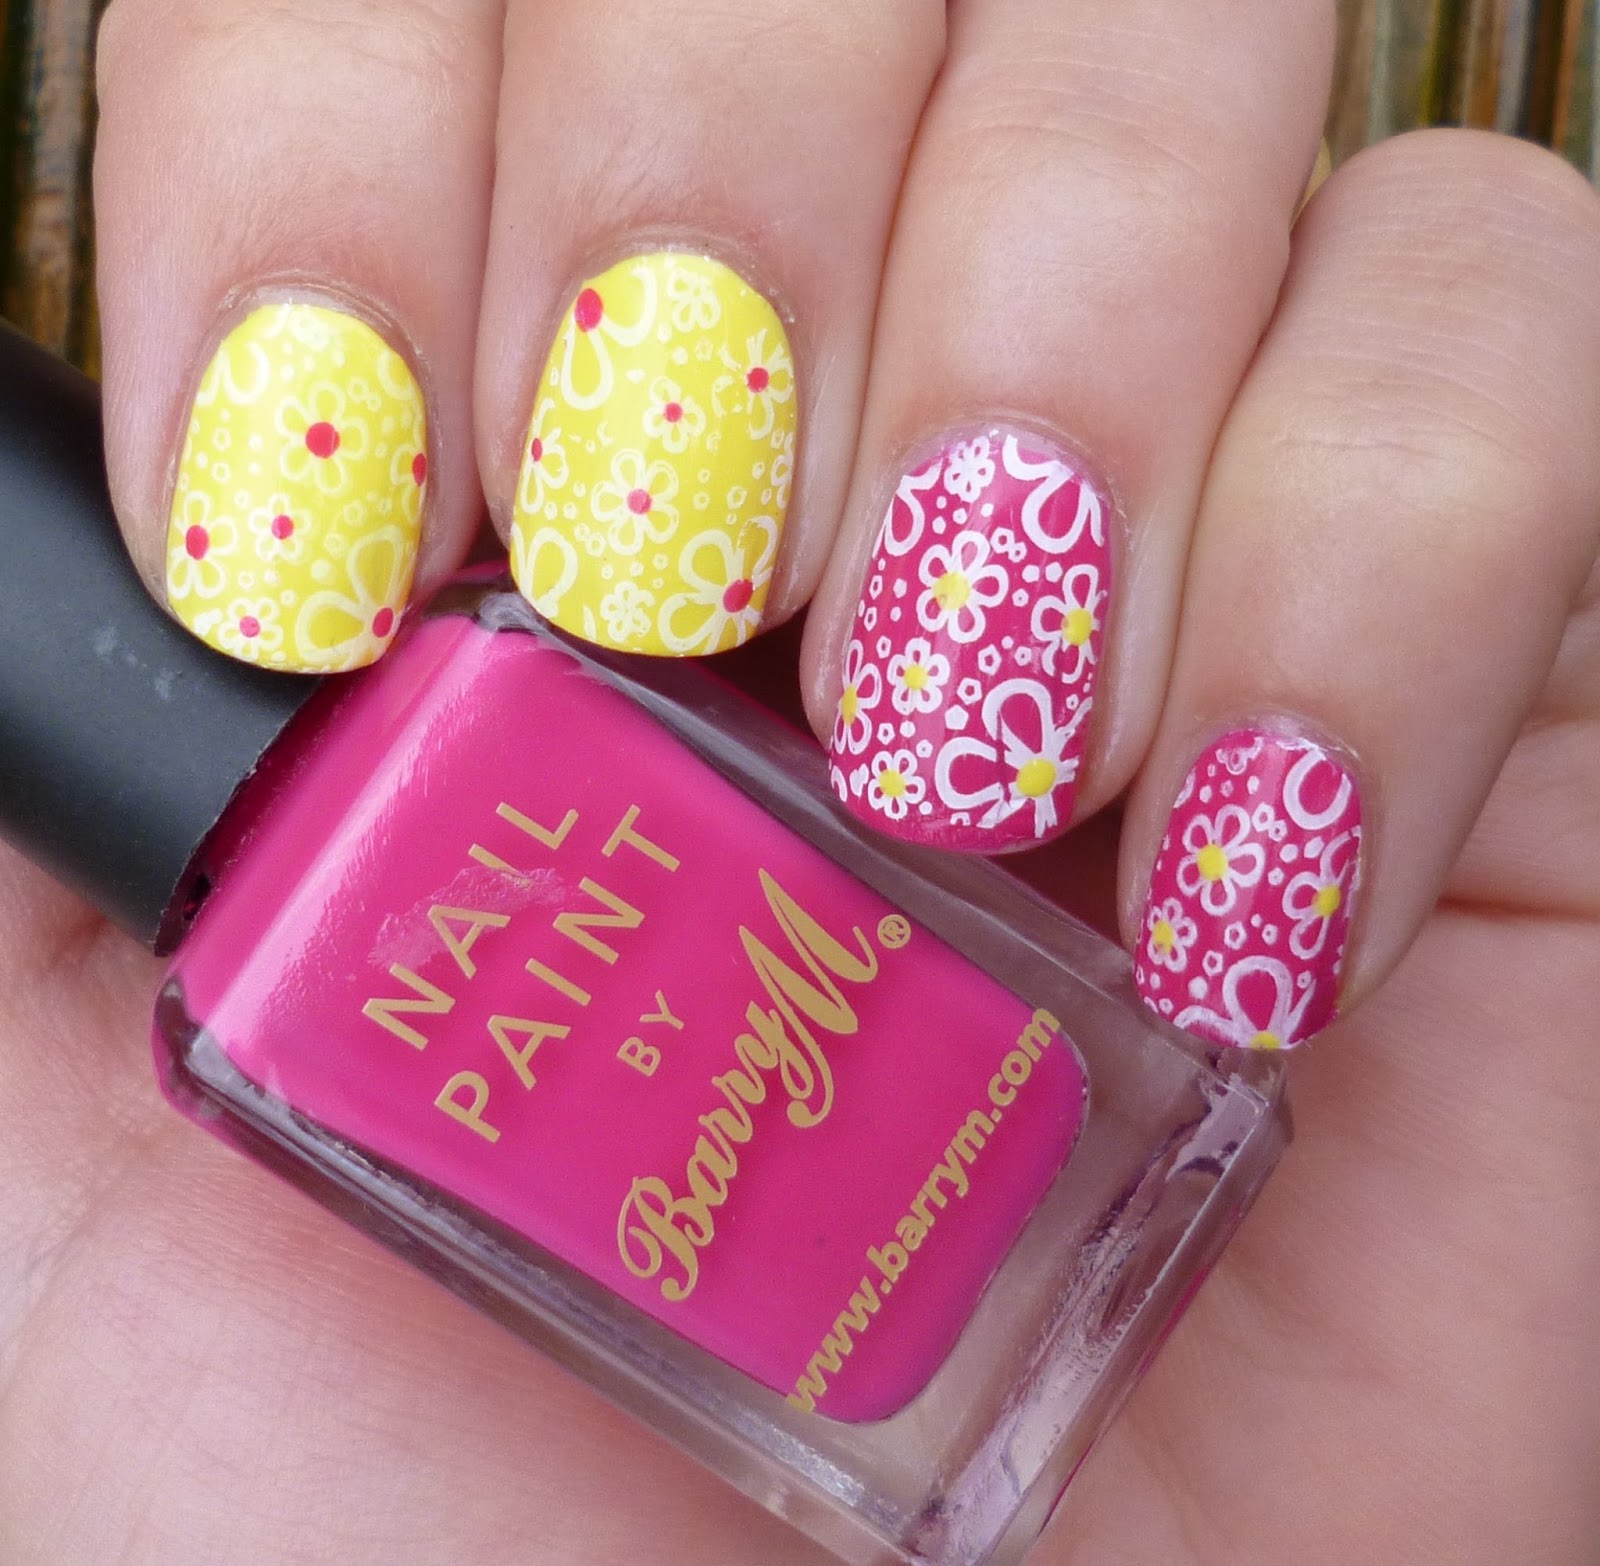 Lou is Perfectly Polished: Yellow and Pink: Summer Flower nails